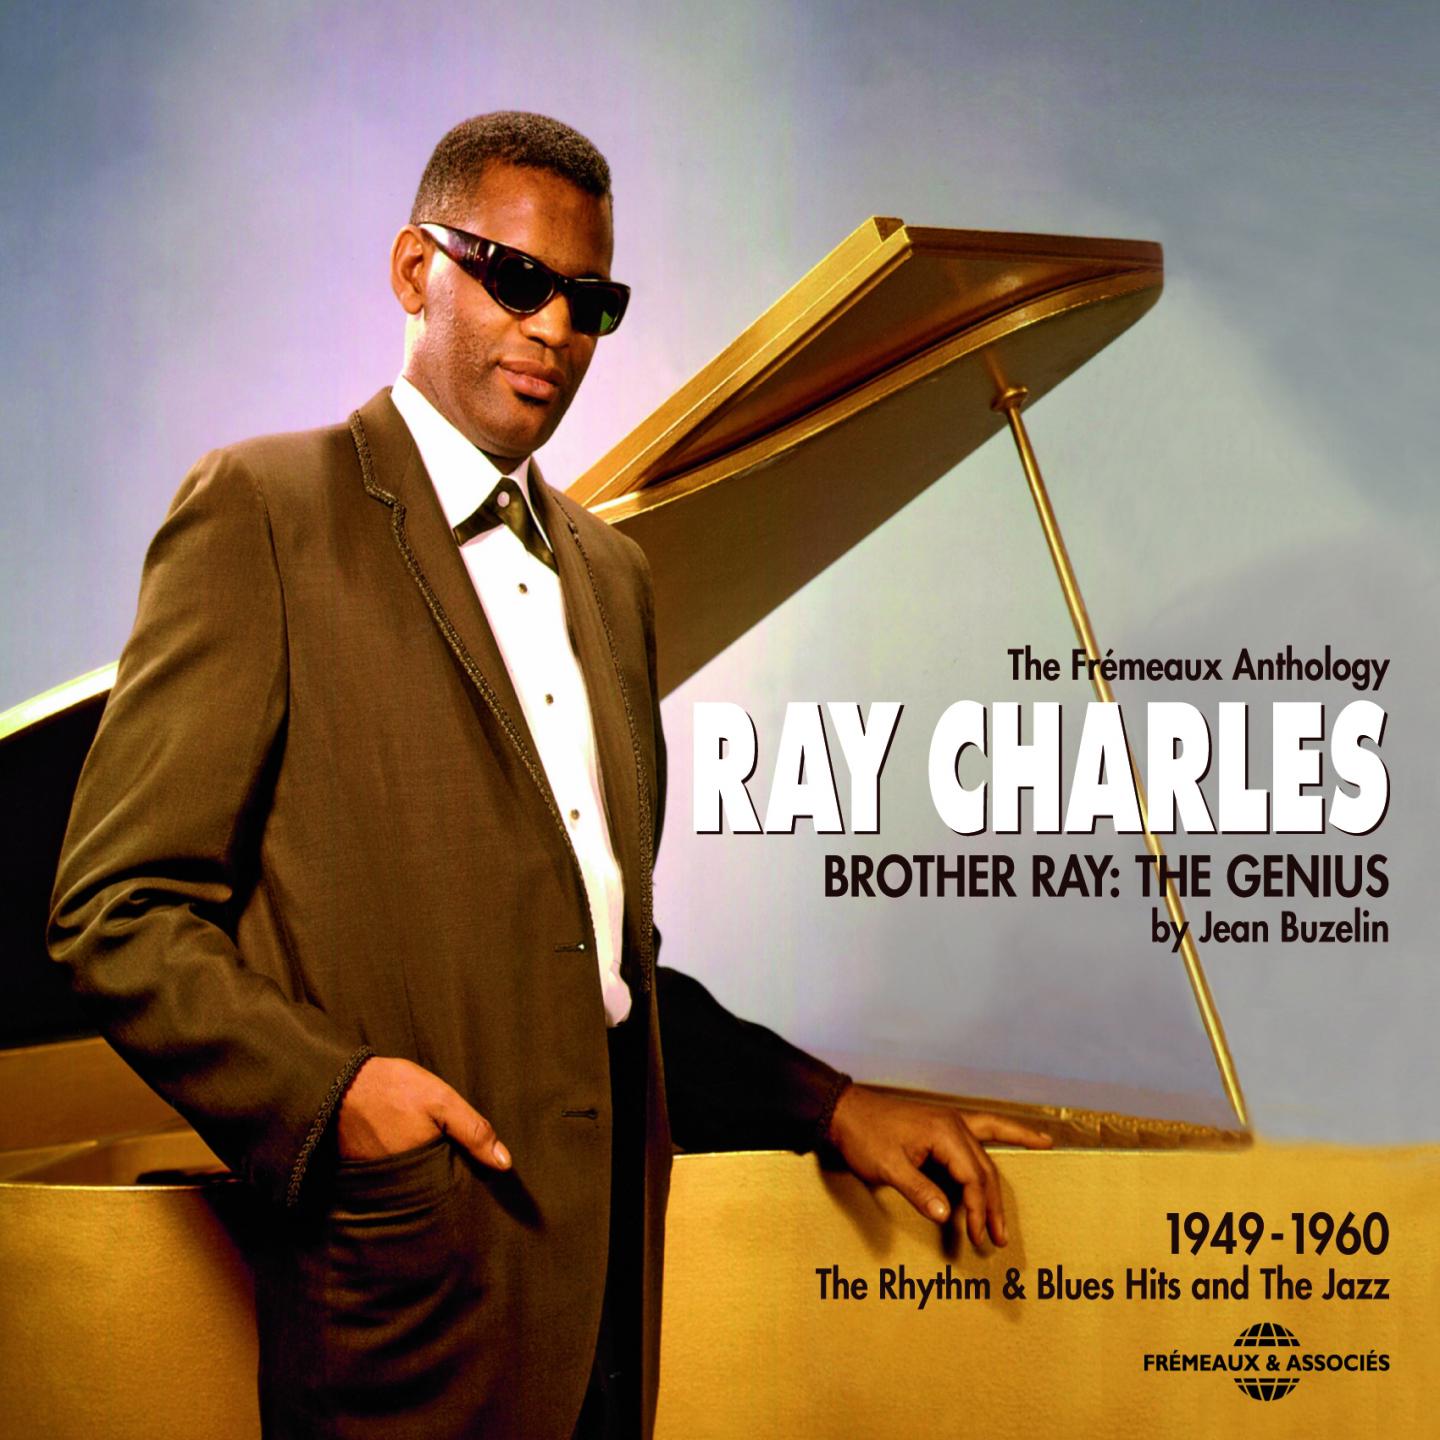 Ray Charles 1949-1960: Brother Ray the Genius (The Rhythm & Blues Hits and the Jazz)